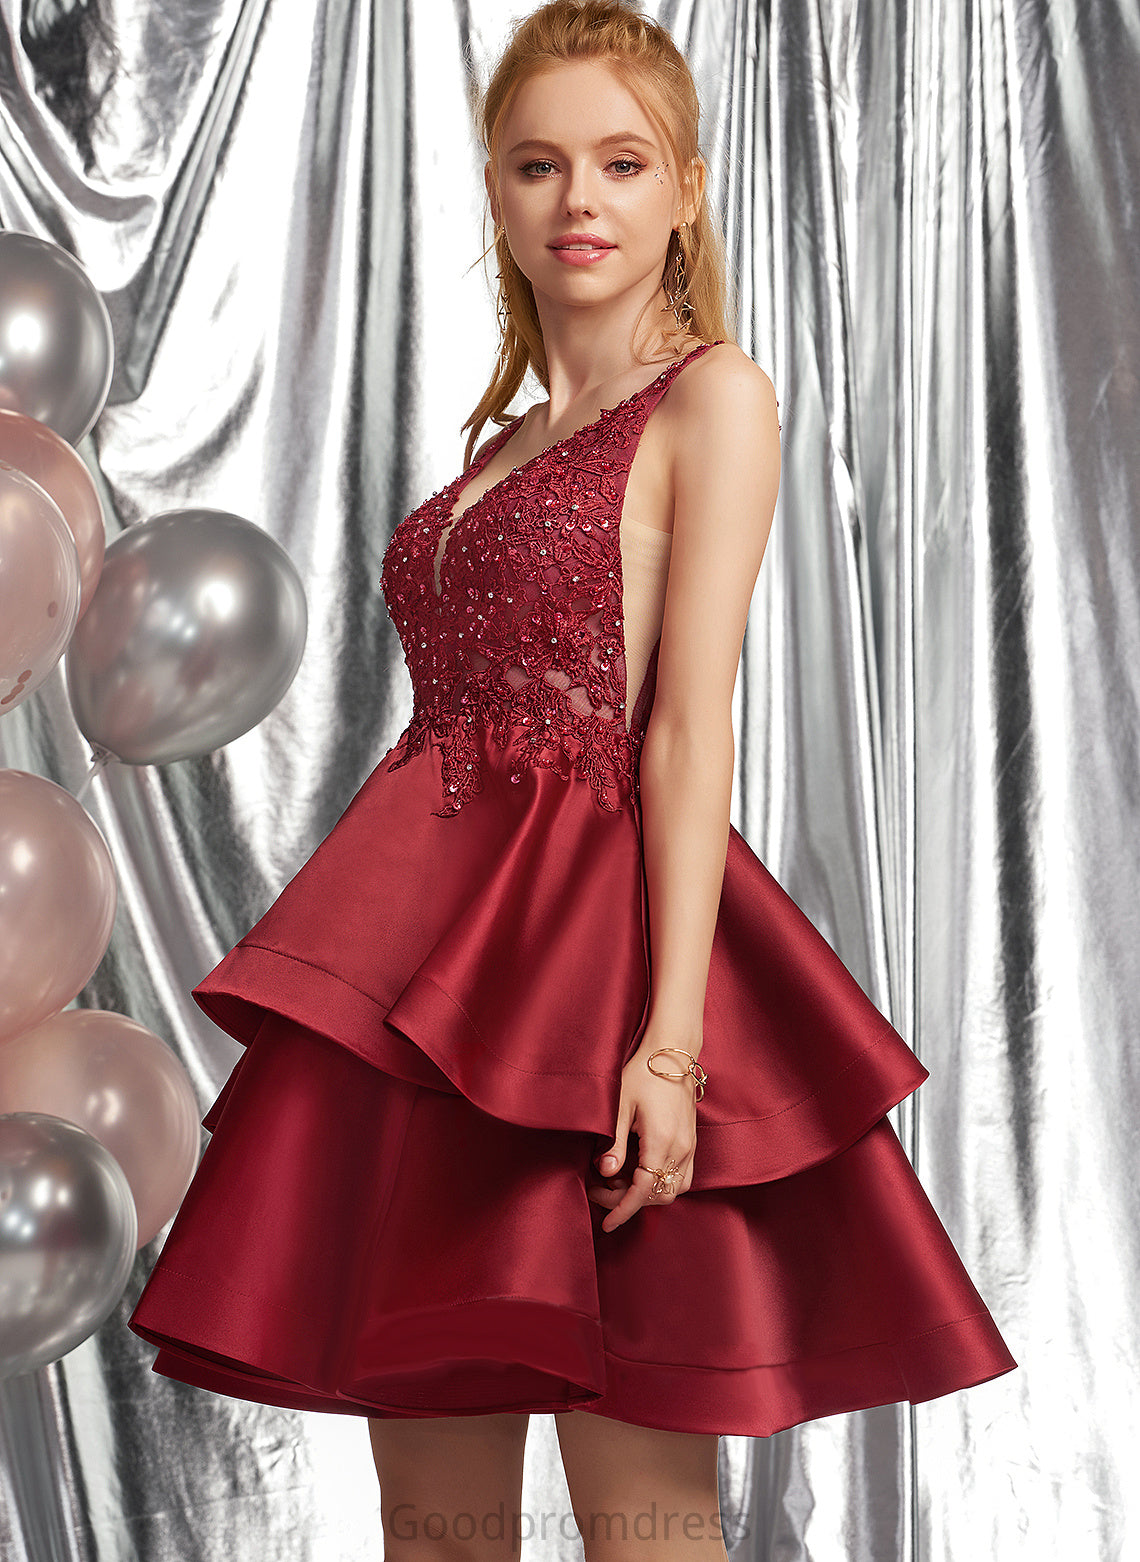 Satin Sequins Homecoming With Dress A-Line Beading V-neck Hailey Homecoming Dresses Short/Mini Lace